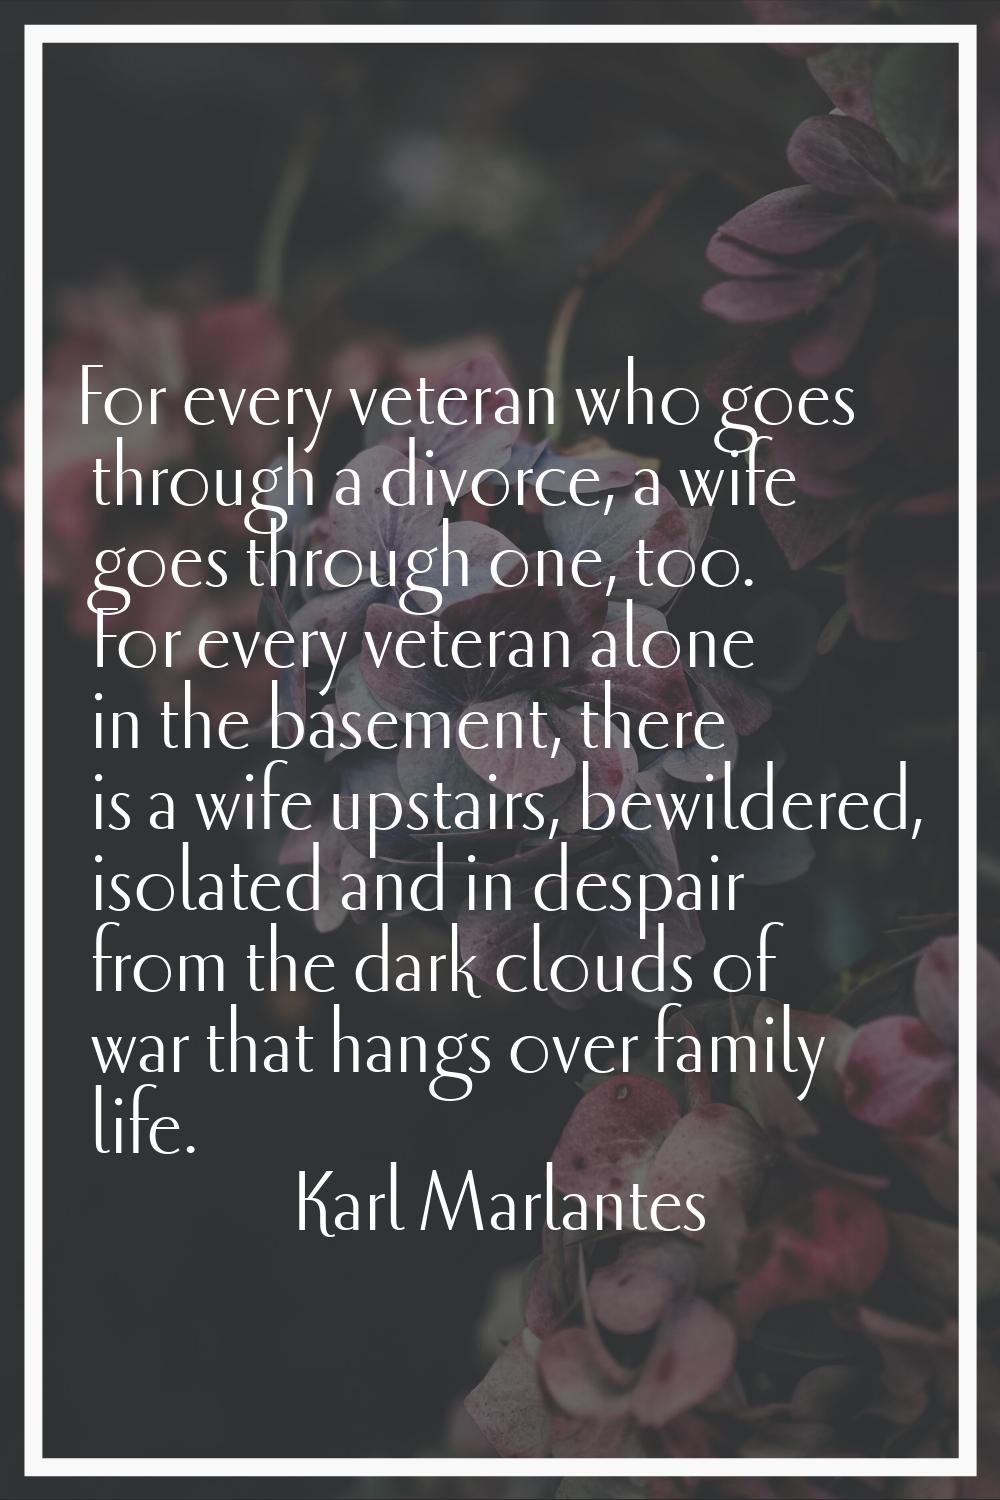 For every veteran who goes through a divorce, a wife goes through one, too. For every veteran alone